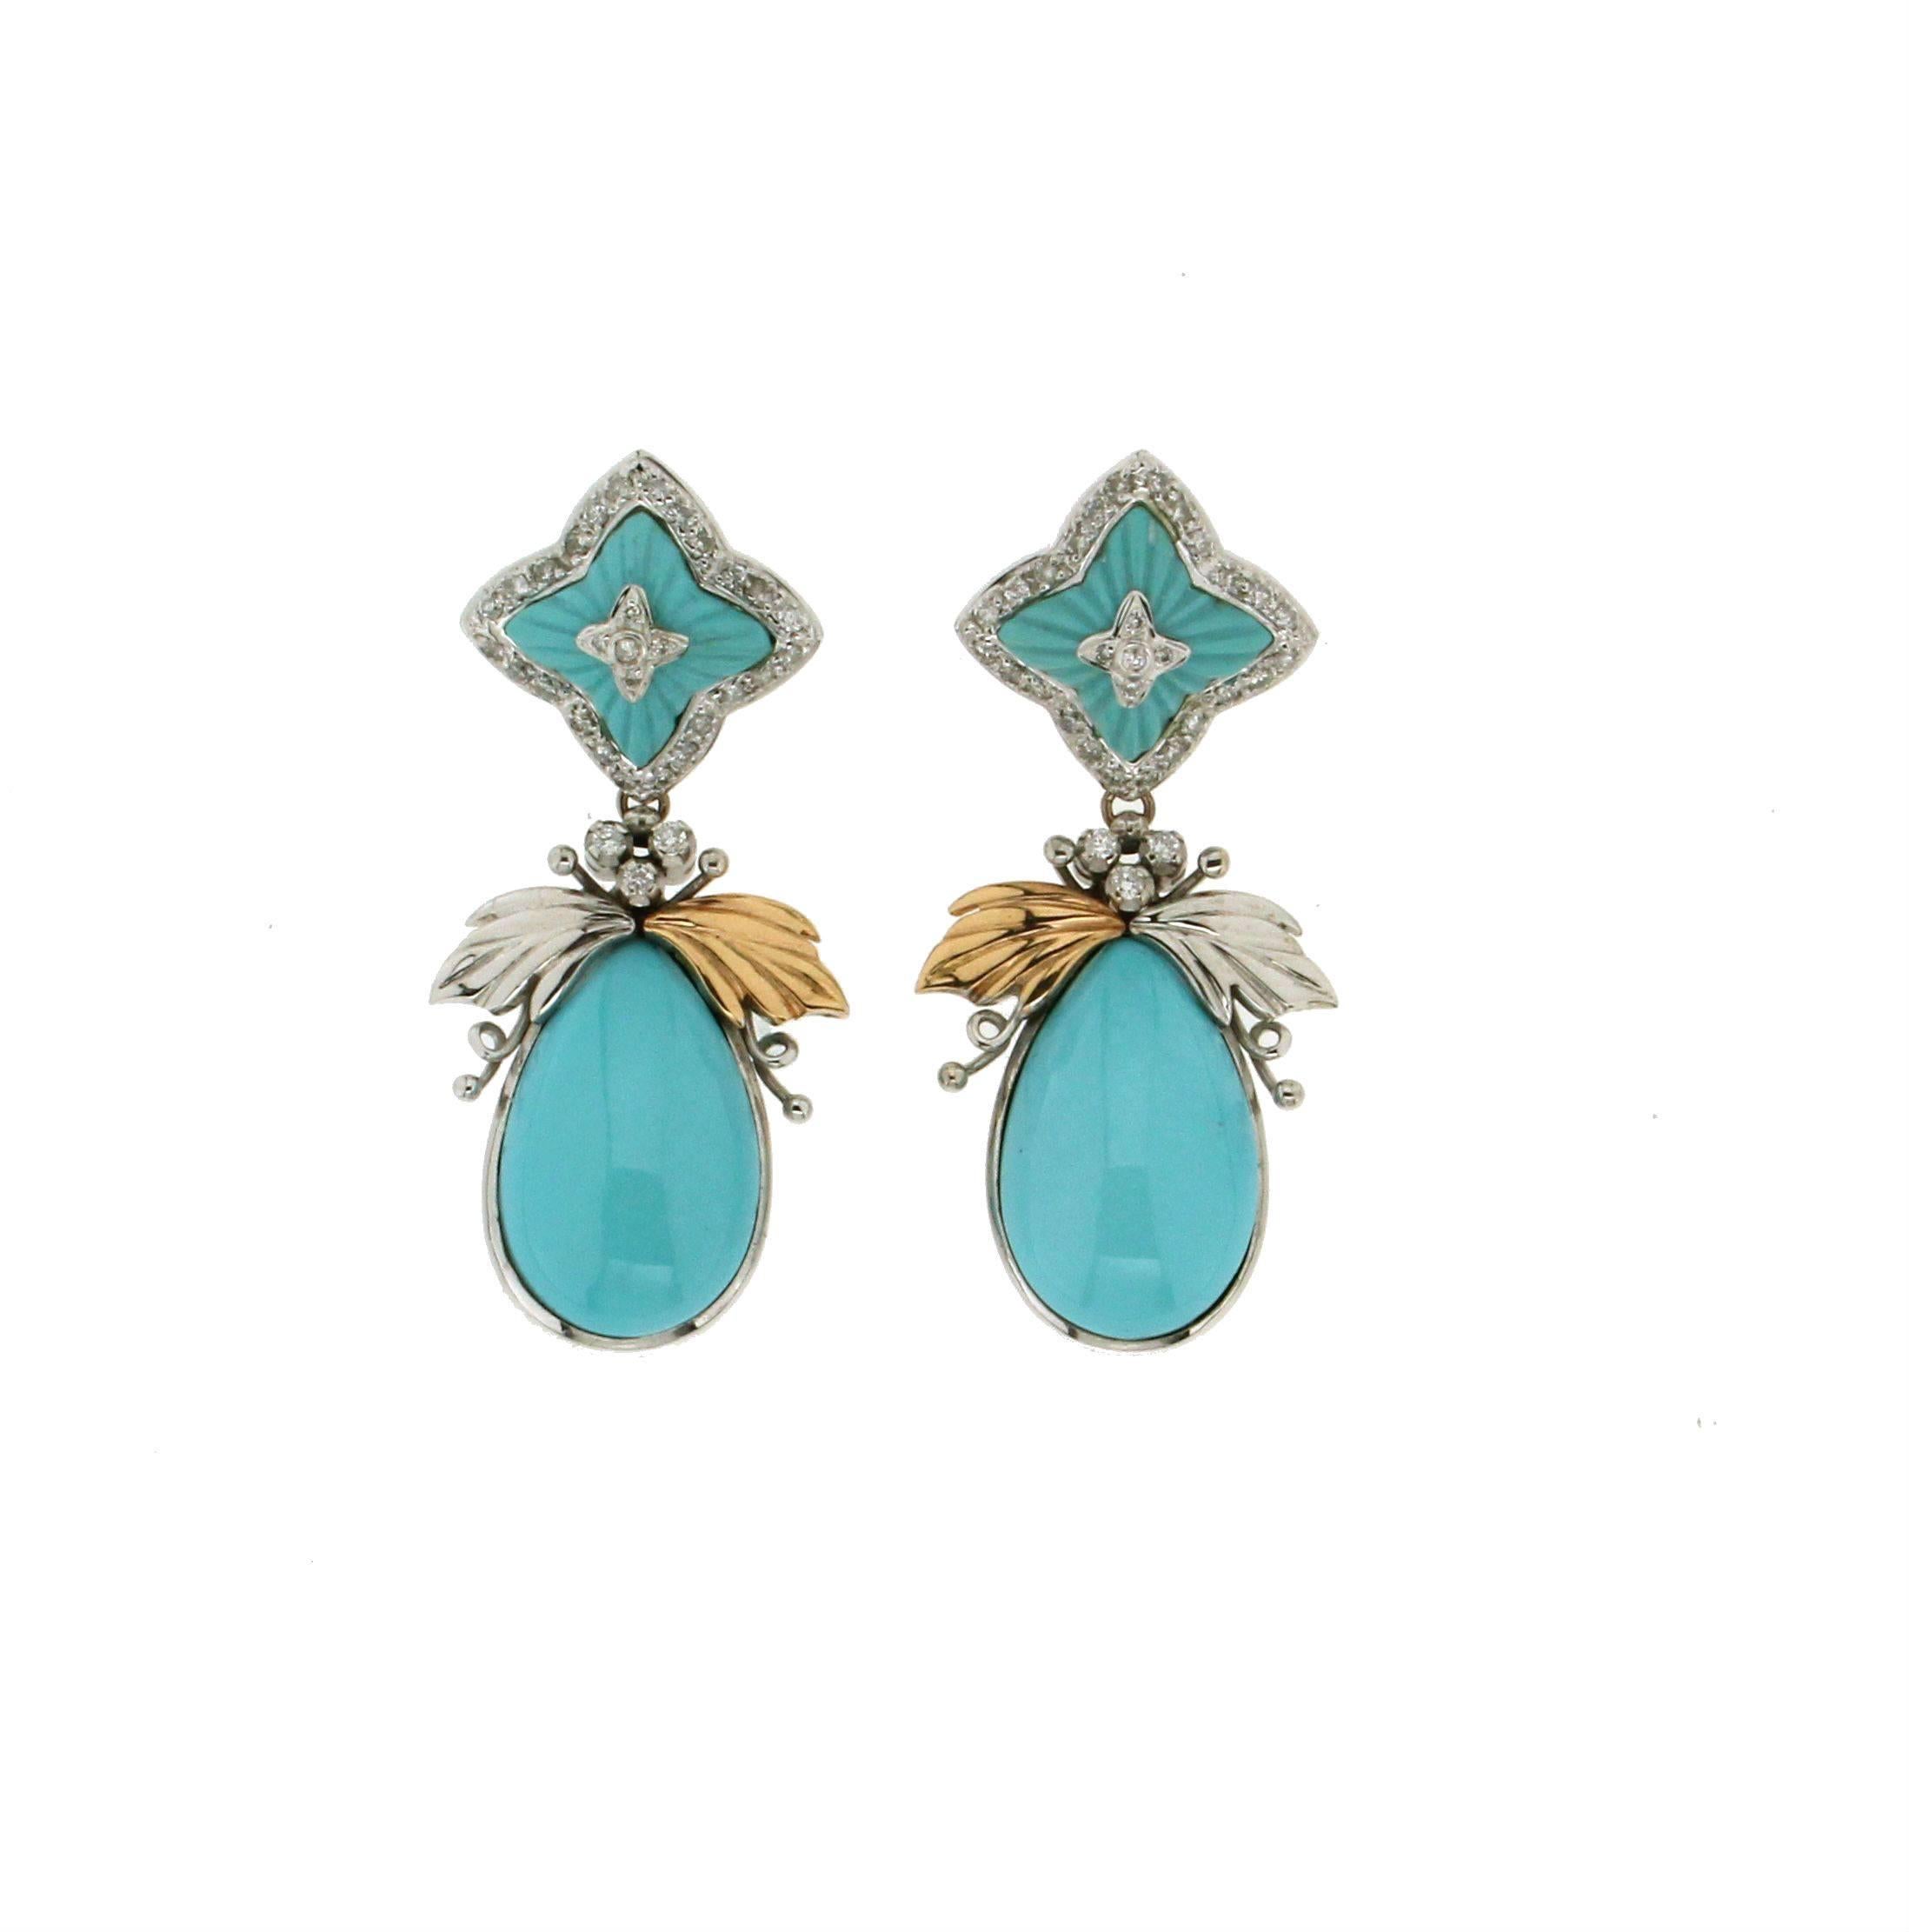 Charming earring mounted in yellow & white gold 18 kt with drops turquoise and two stars on the top with diamonds around.
Diamonds weight 0.40 kt
Turquoise weight 10,00 gr.
